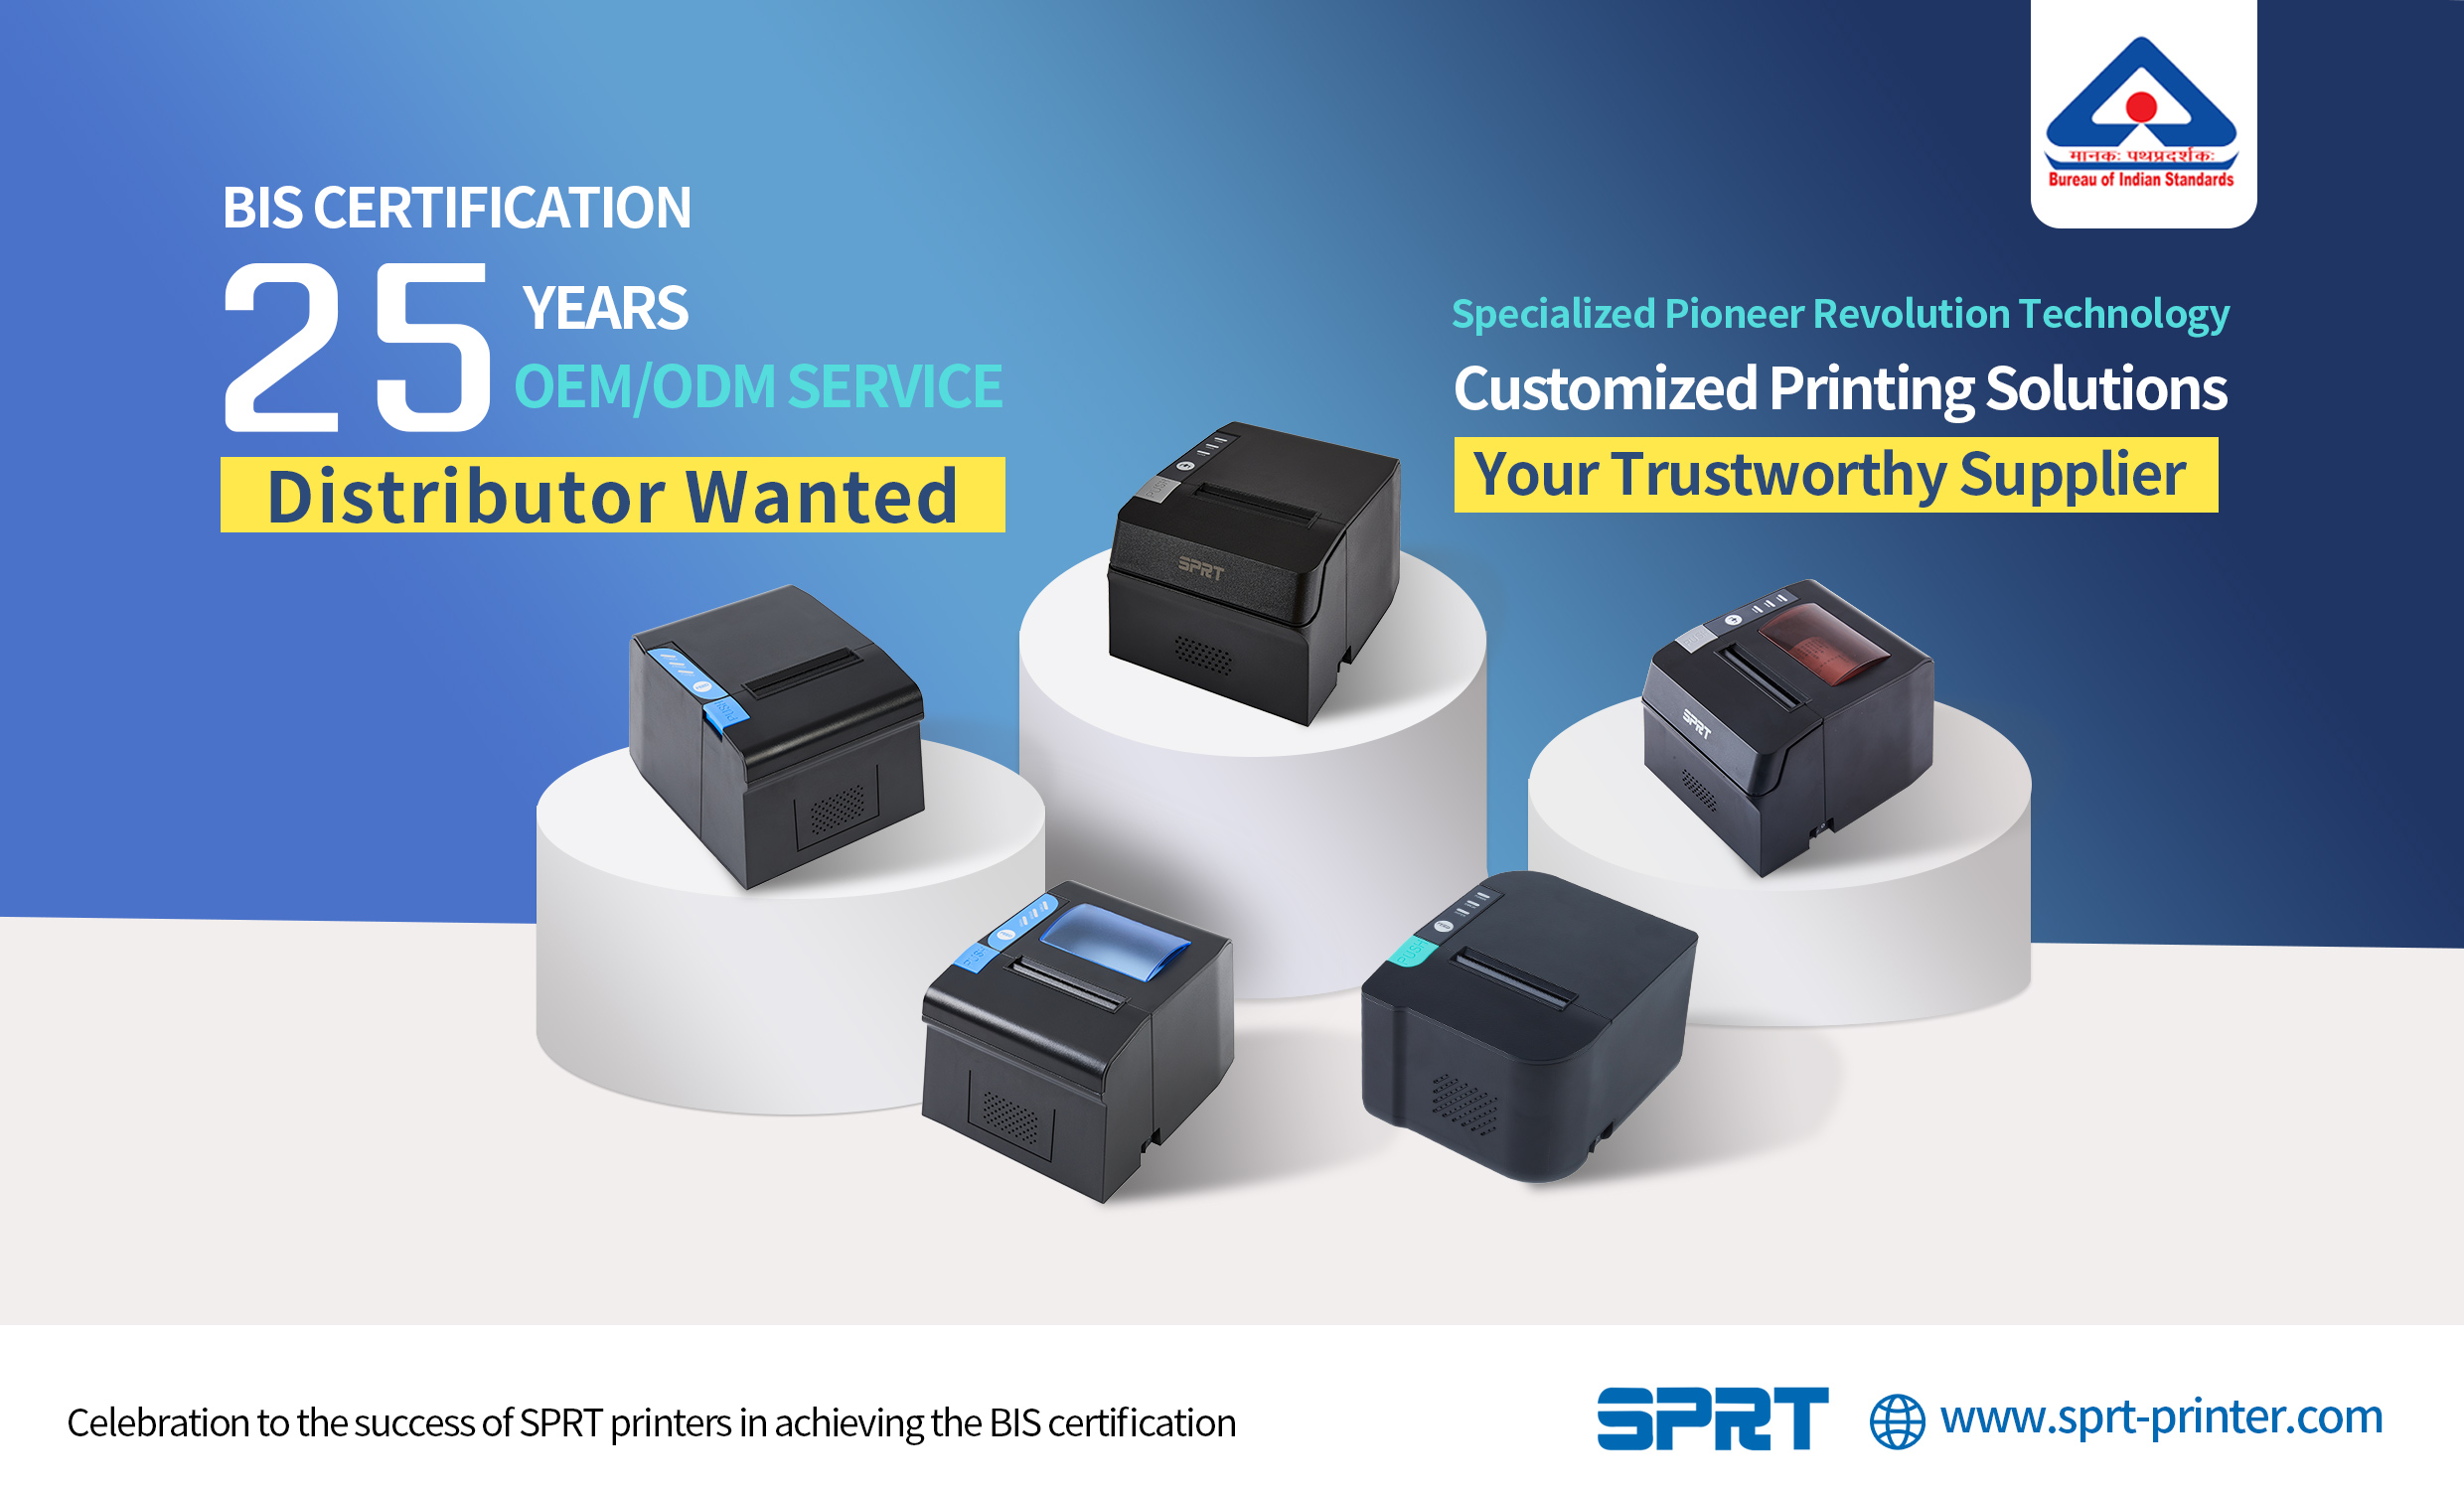 Celebration to the Success of SPRT printers in Achieving the BIS Certification